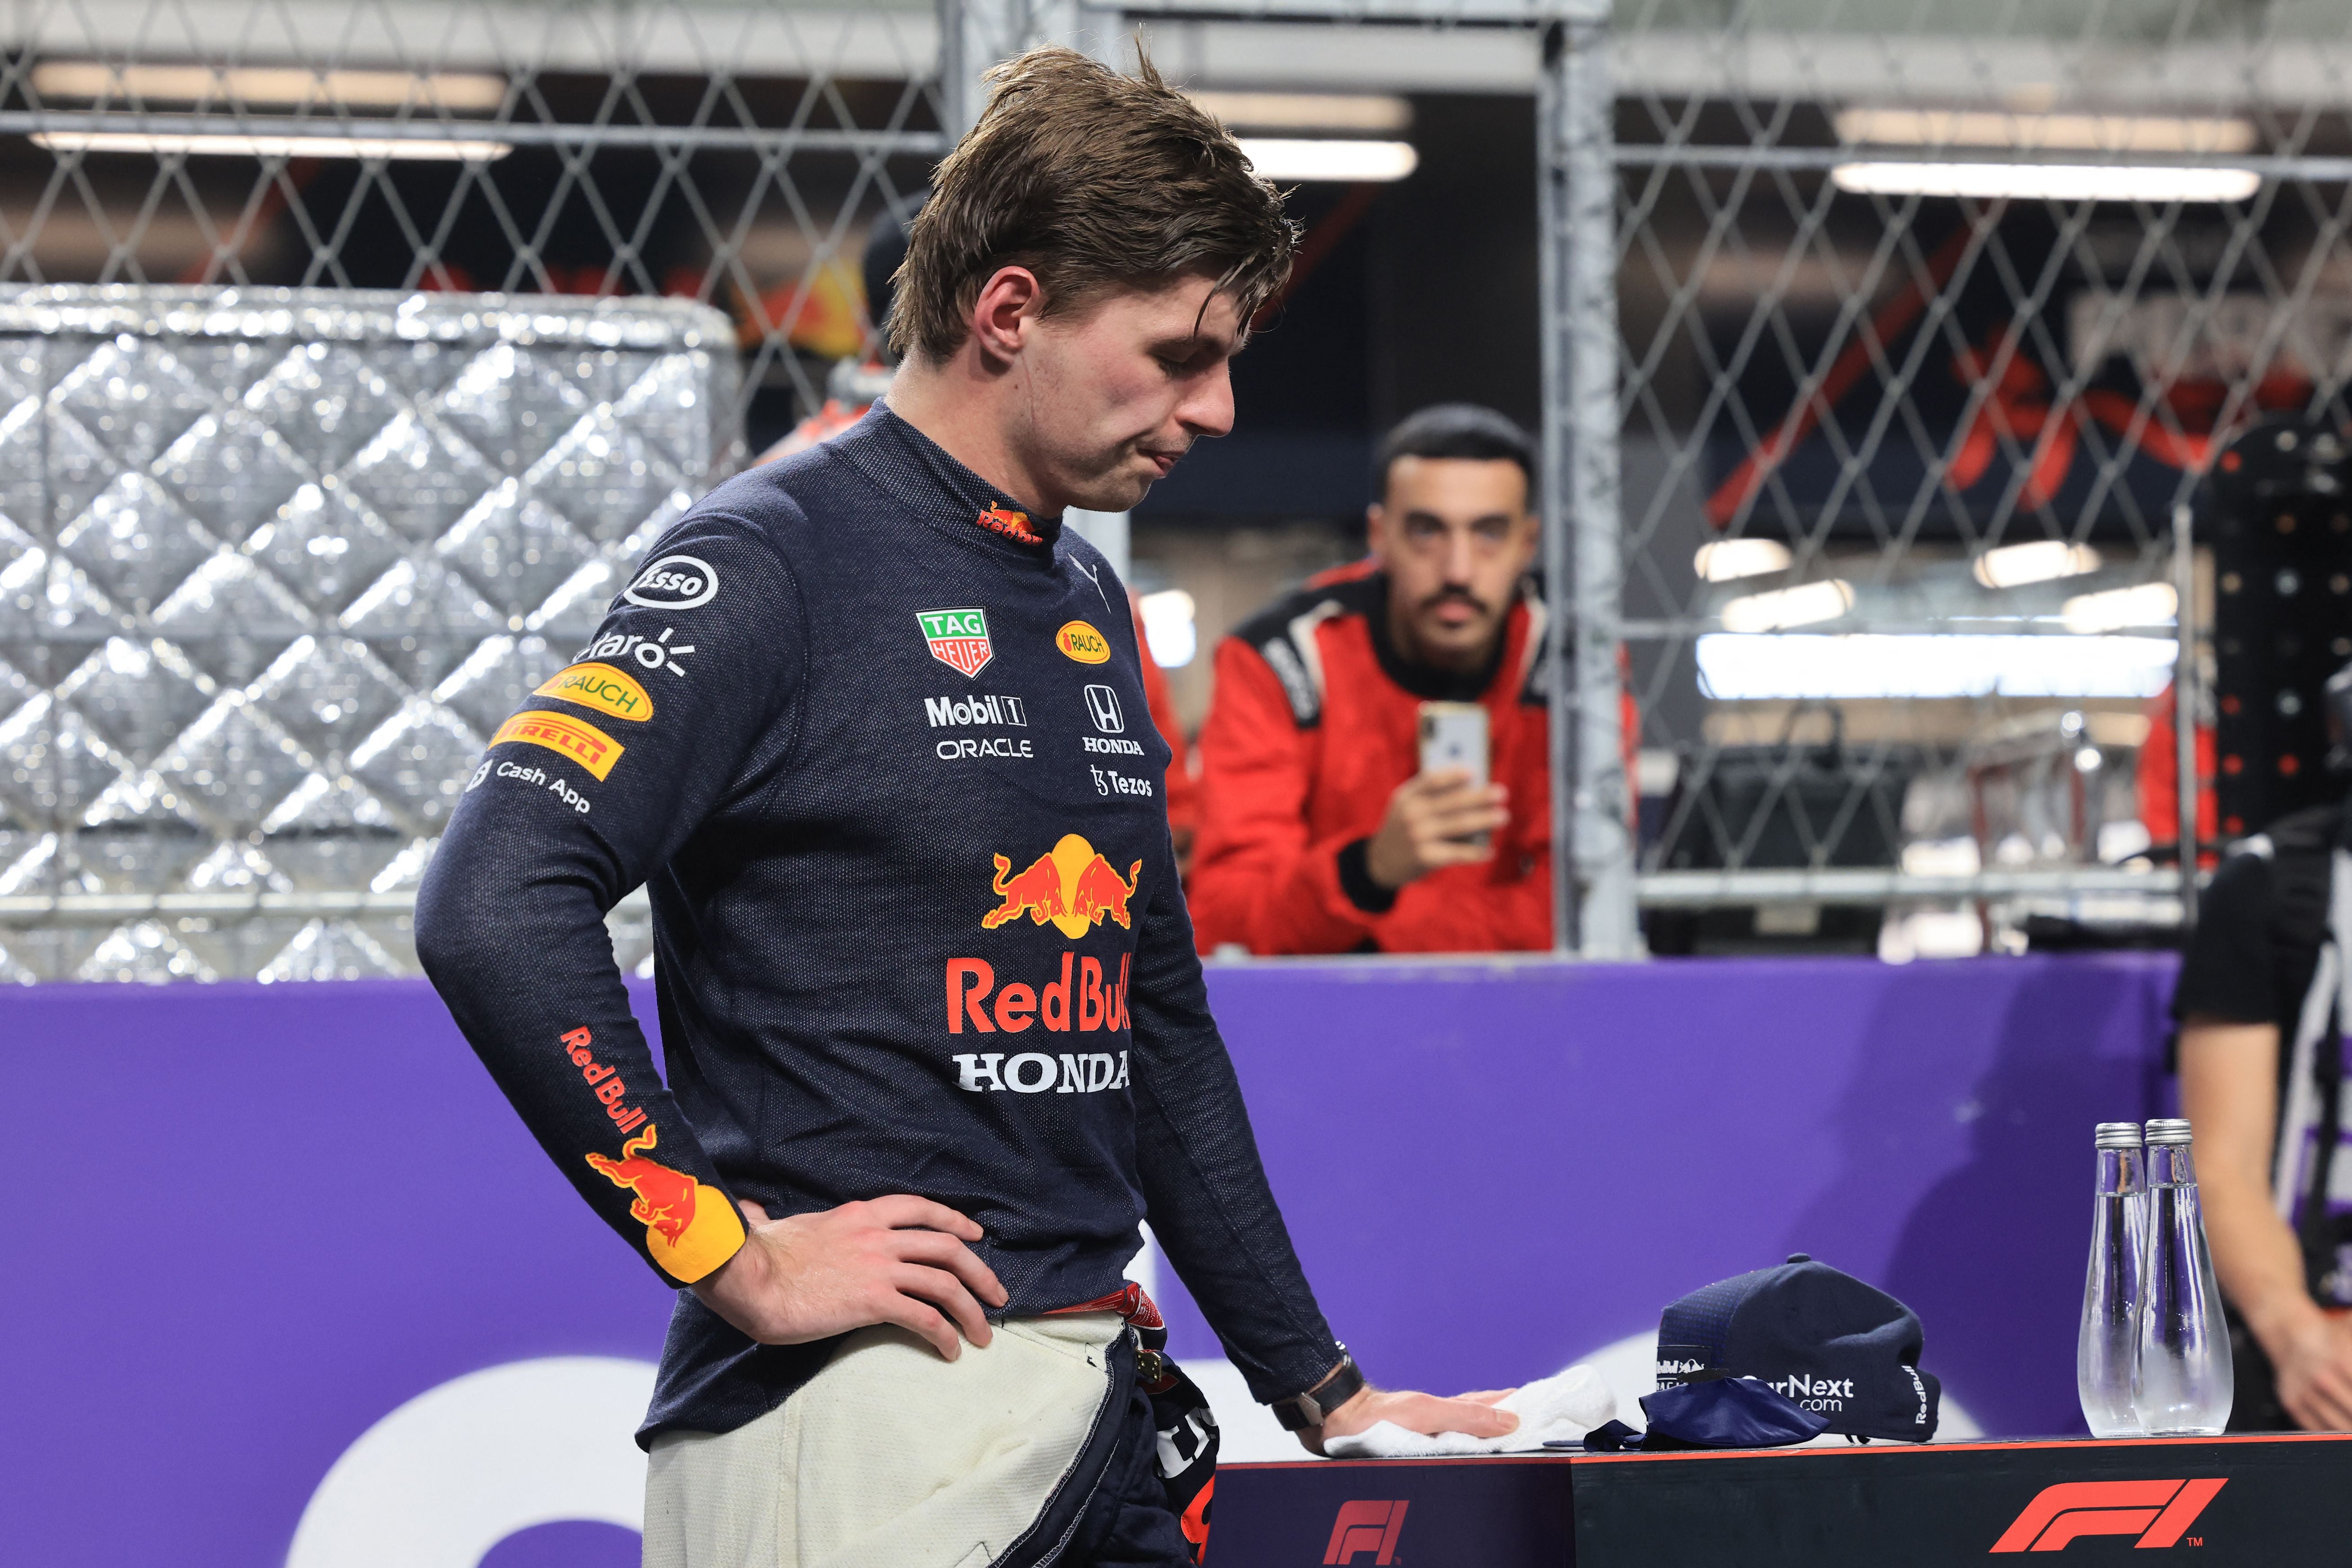 Max Verstappen had to settle for P3 after his late crash